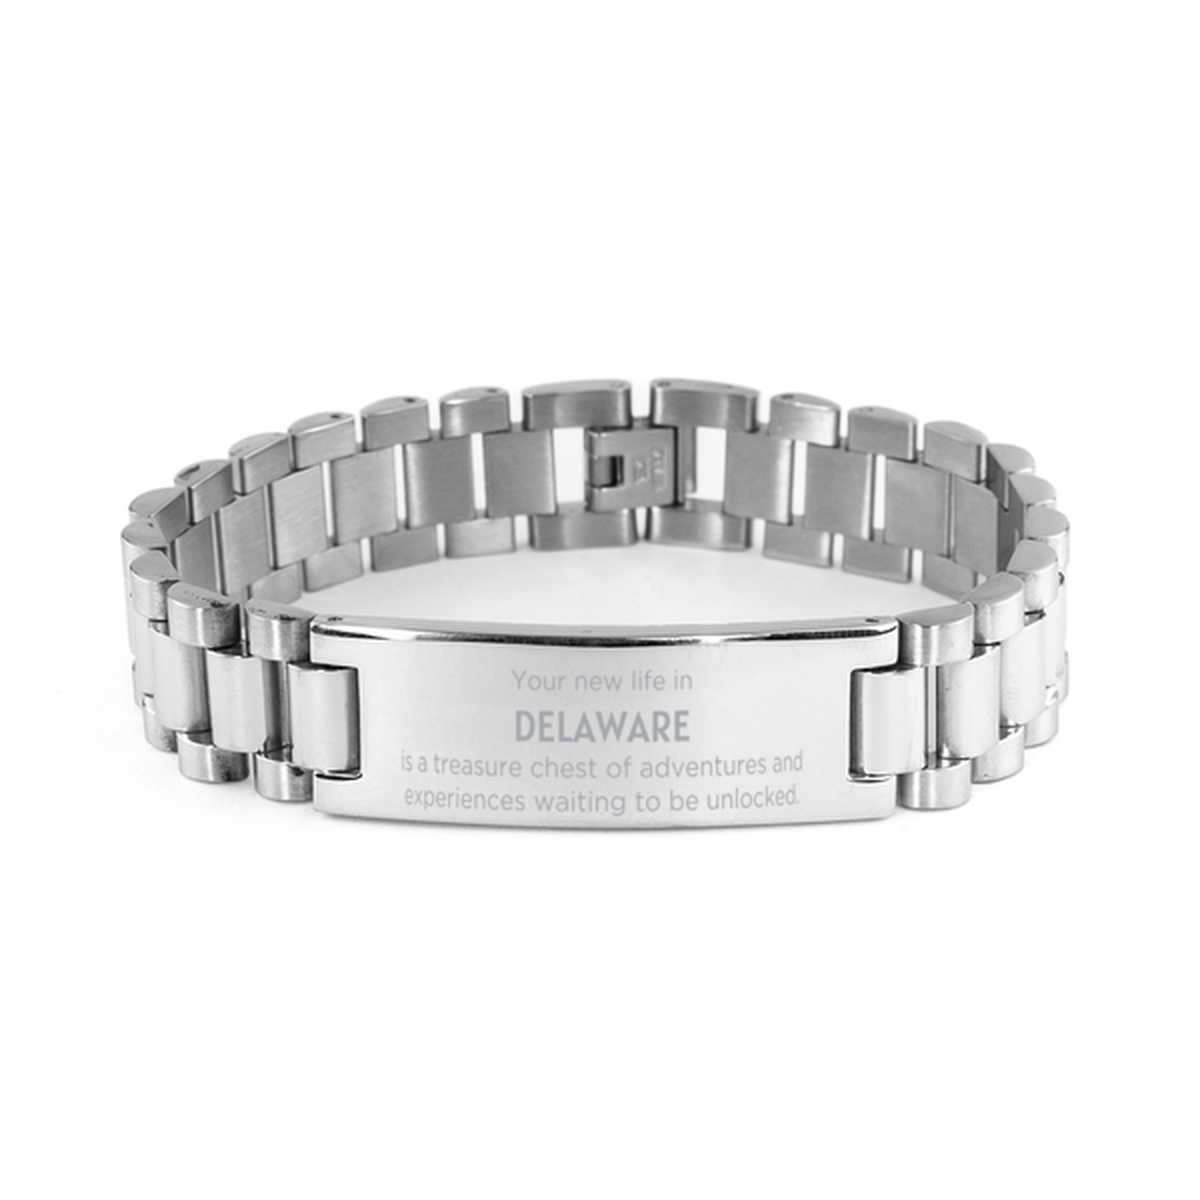 Moving to Delaware Gifts, Your new life in Delaware, Long Distance Delaware Christmas Ladder Stainless Steel Bracelet For Men, Women, Friends, Coworkers